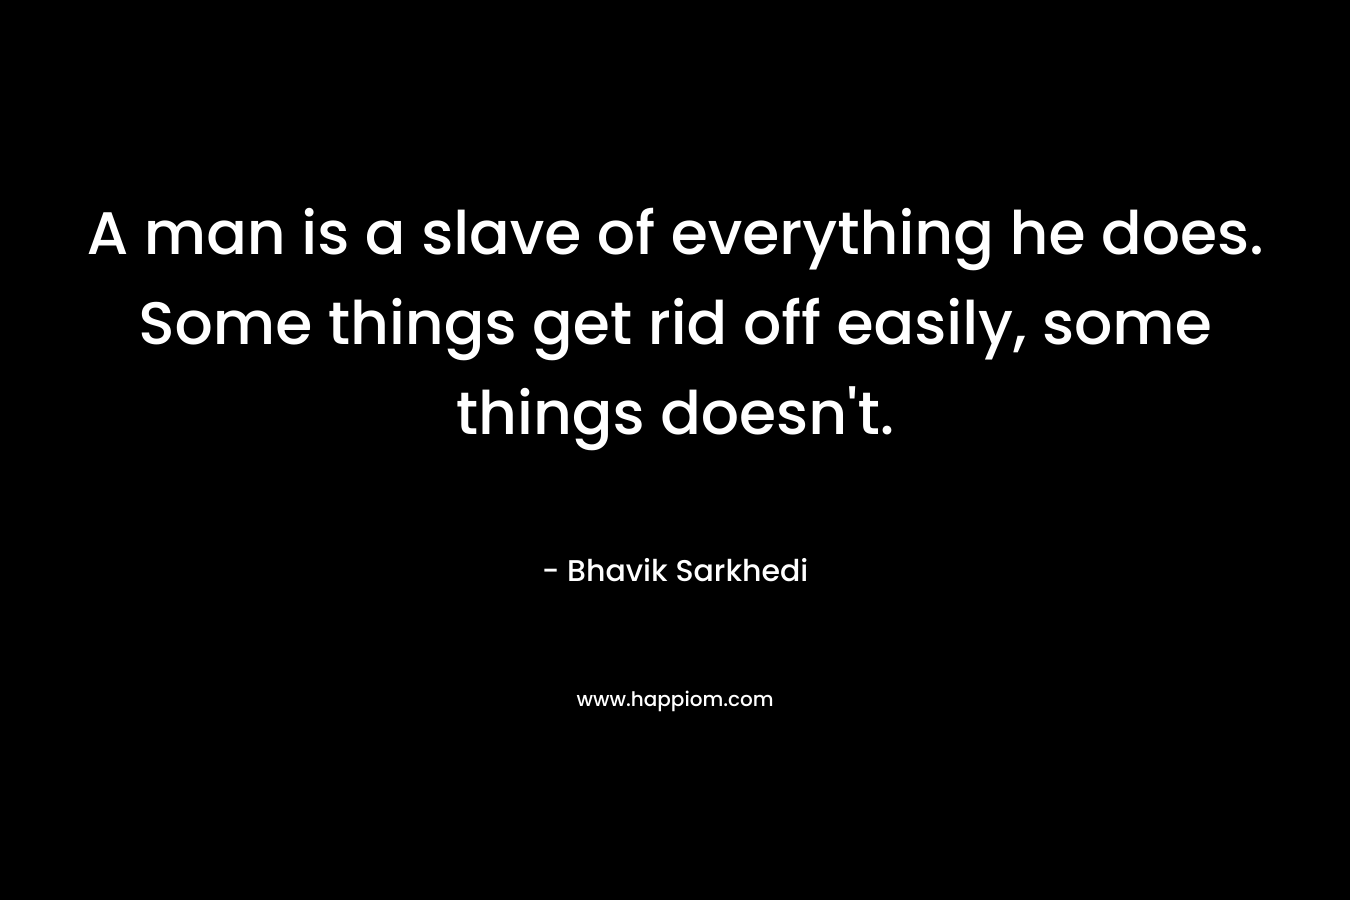 A man is a slave of everything he does. Some things get rid off easily, some things doesn't.